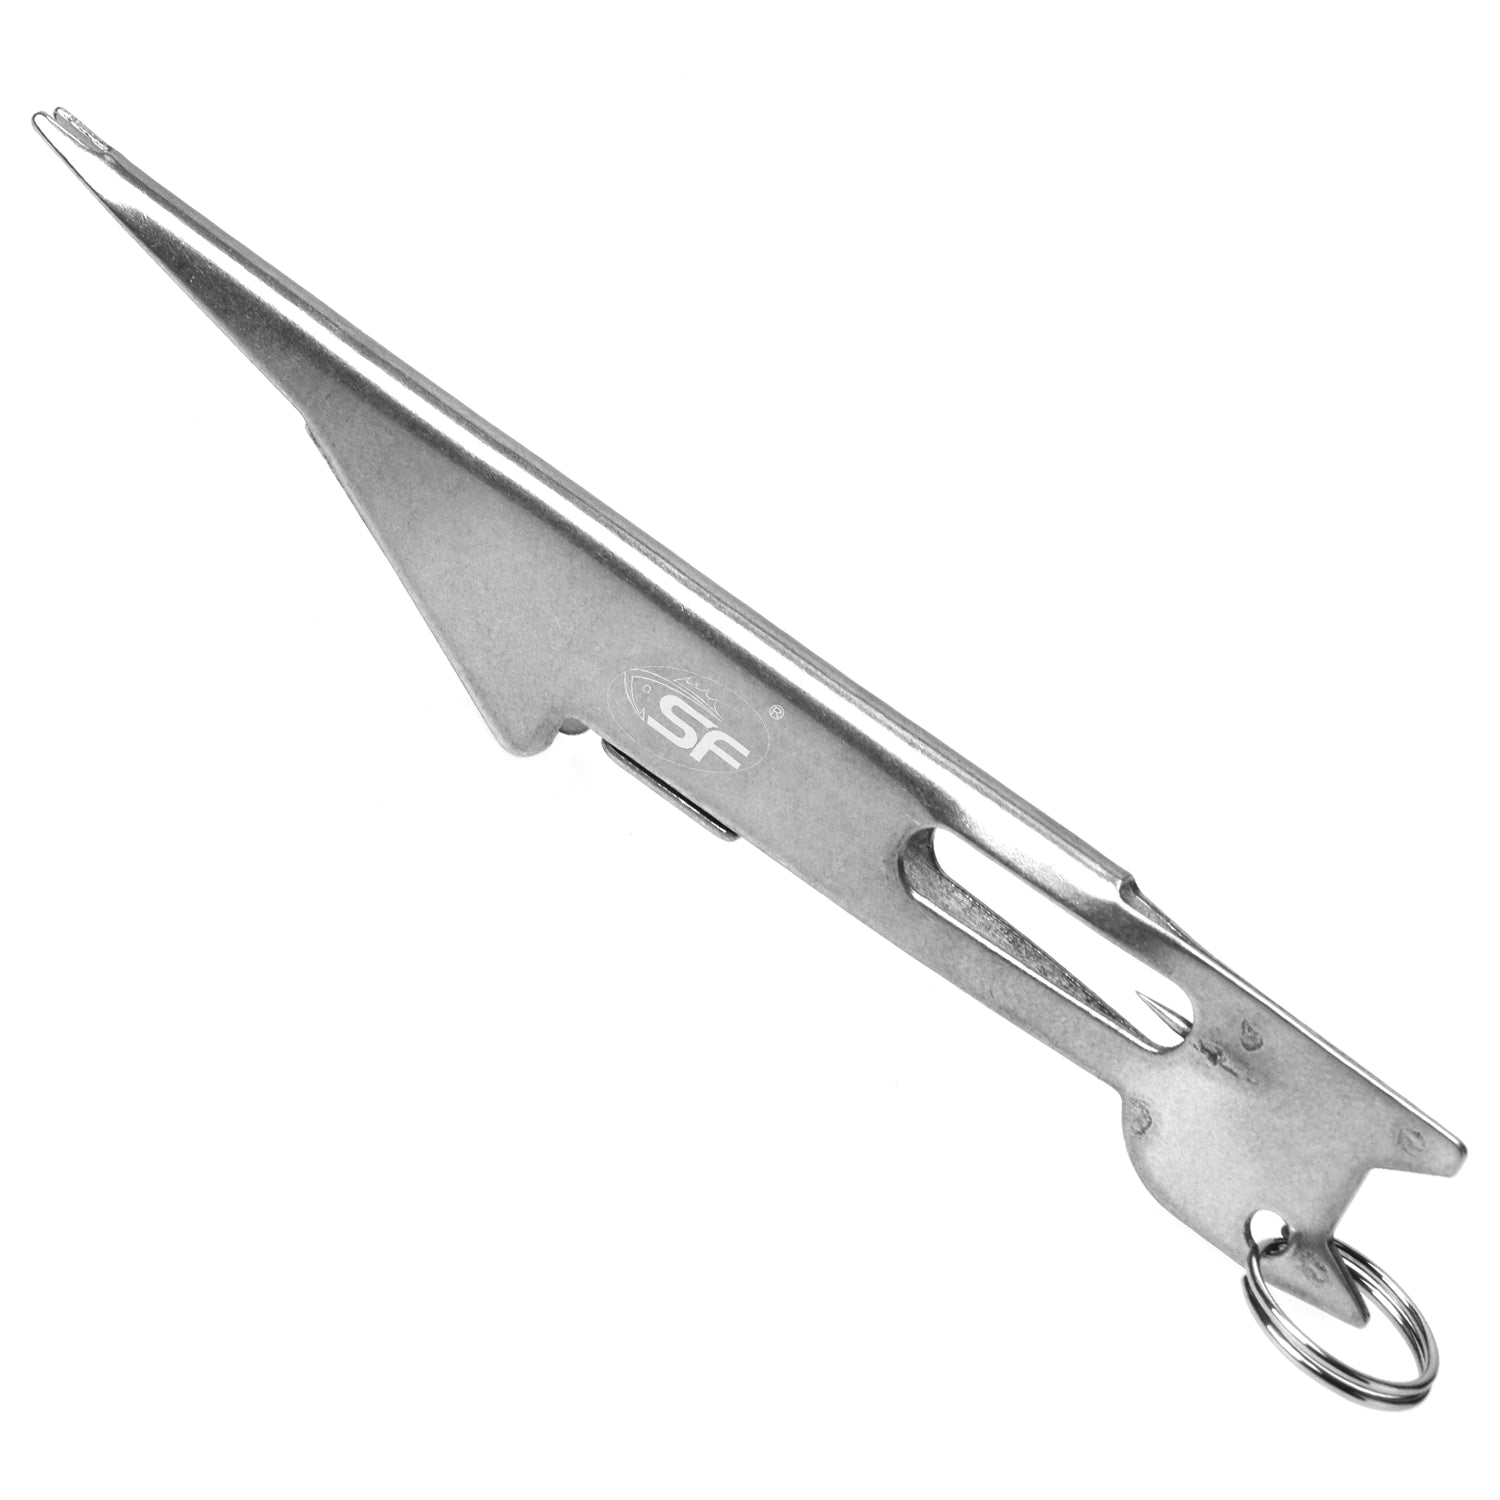 Caimore Nail Knot Tool -   Fly fishing accessories, Fishing rigs,  Knots